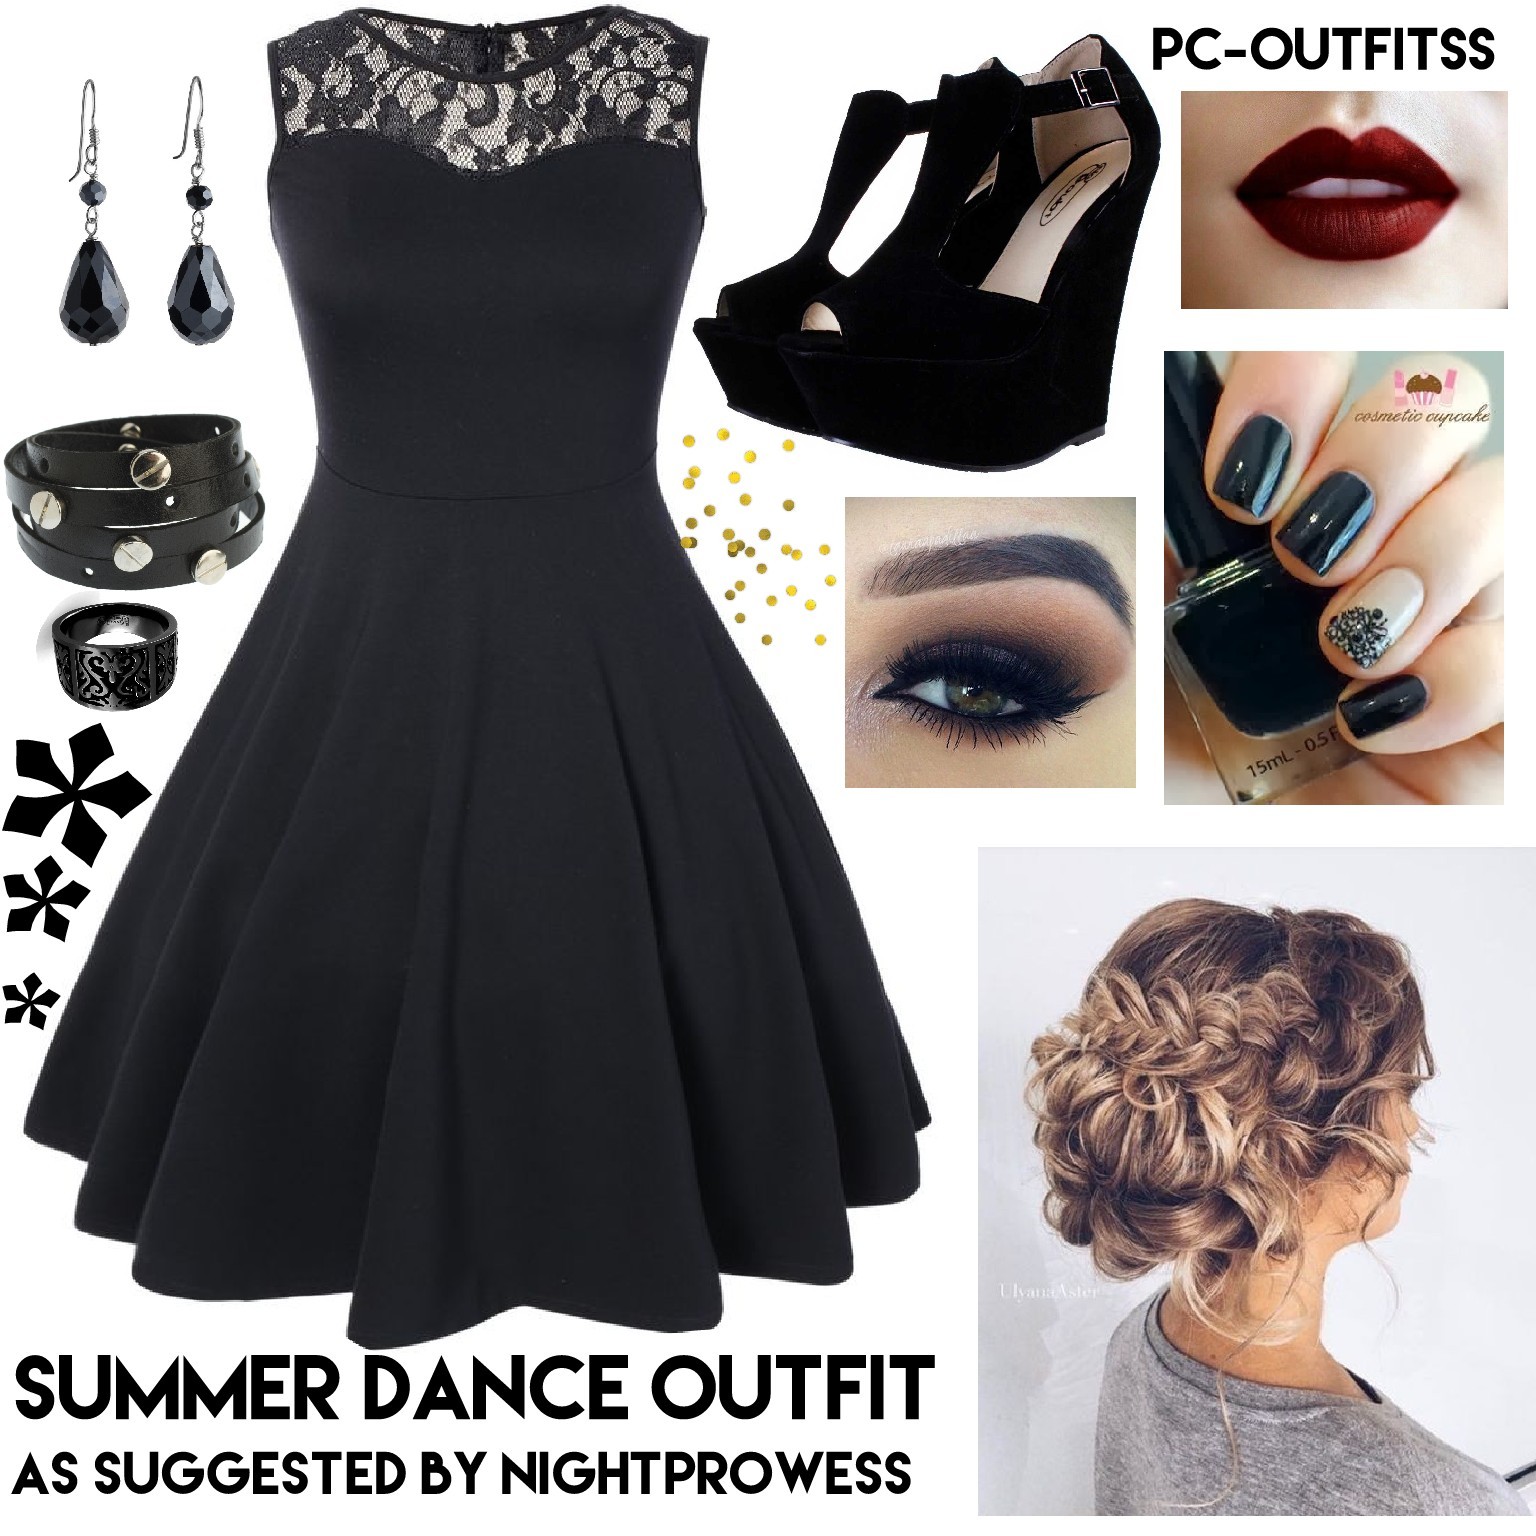 Pc-outfitss | I hope you like this!|| Also if I do a contest will ypu guys enter?